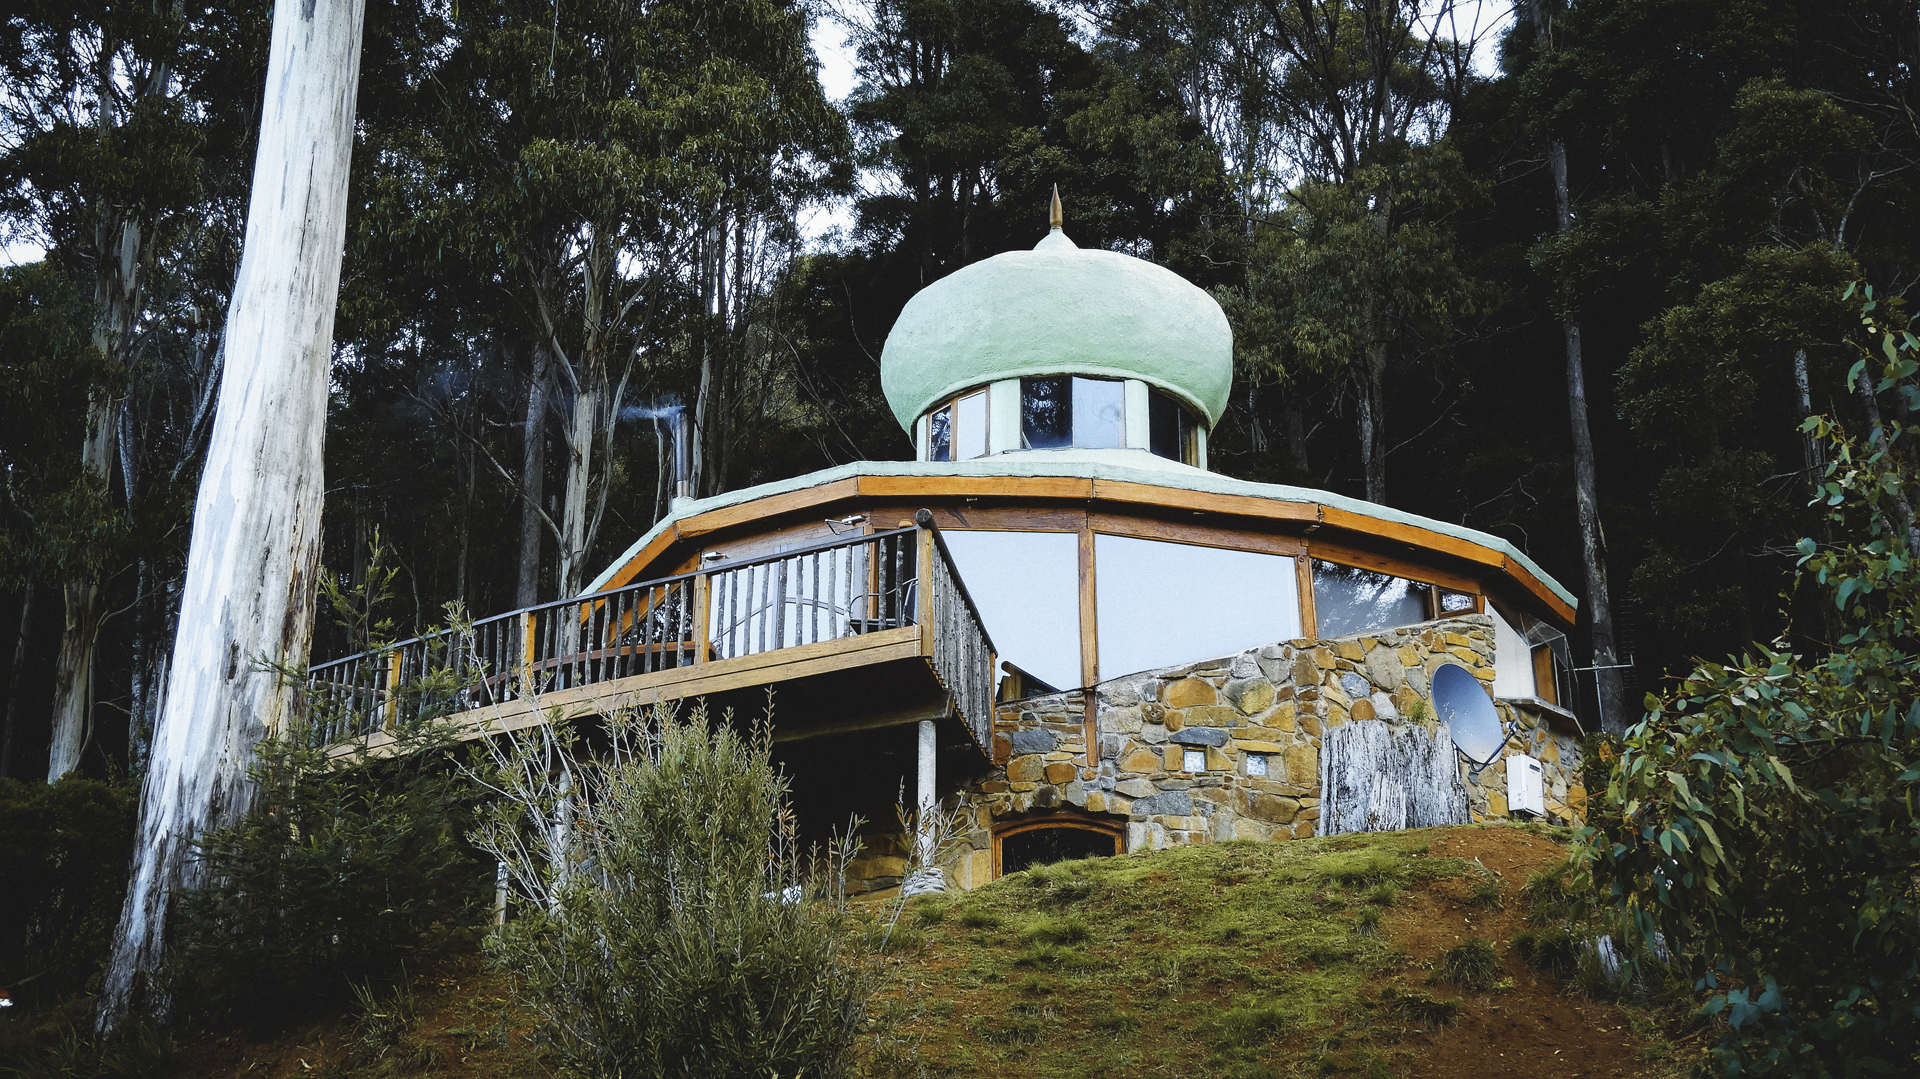 The Roundhouse : Rainforest & Mountains